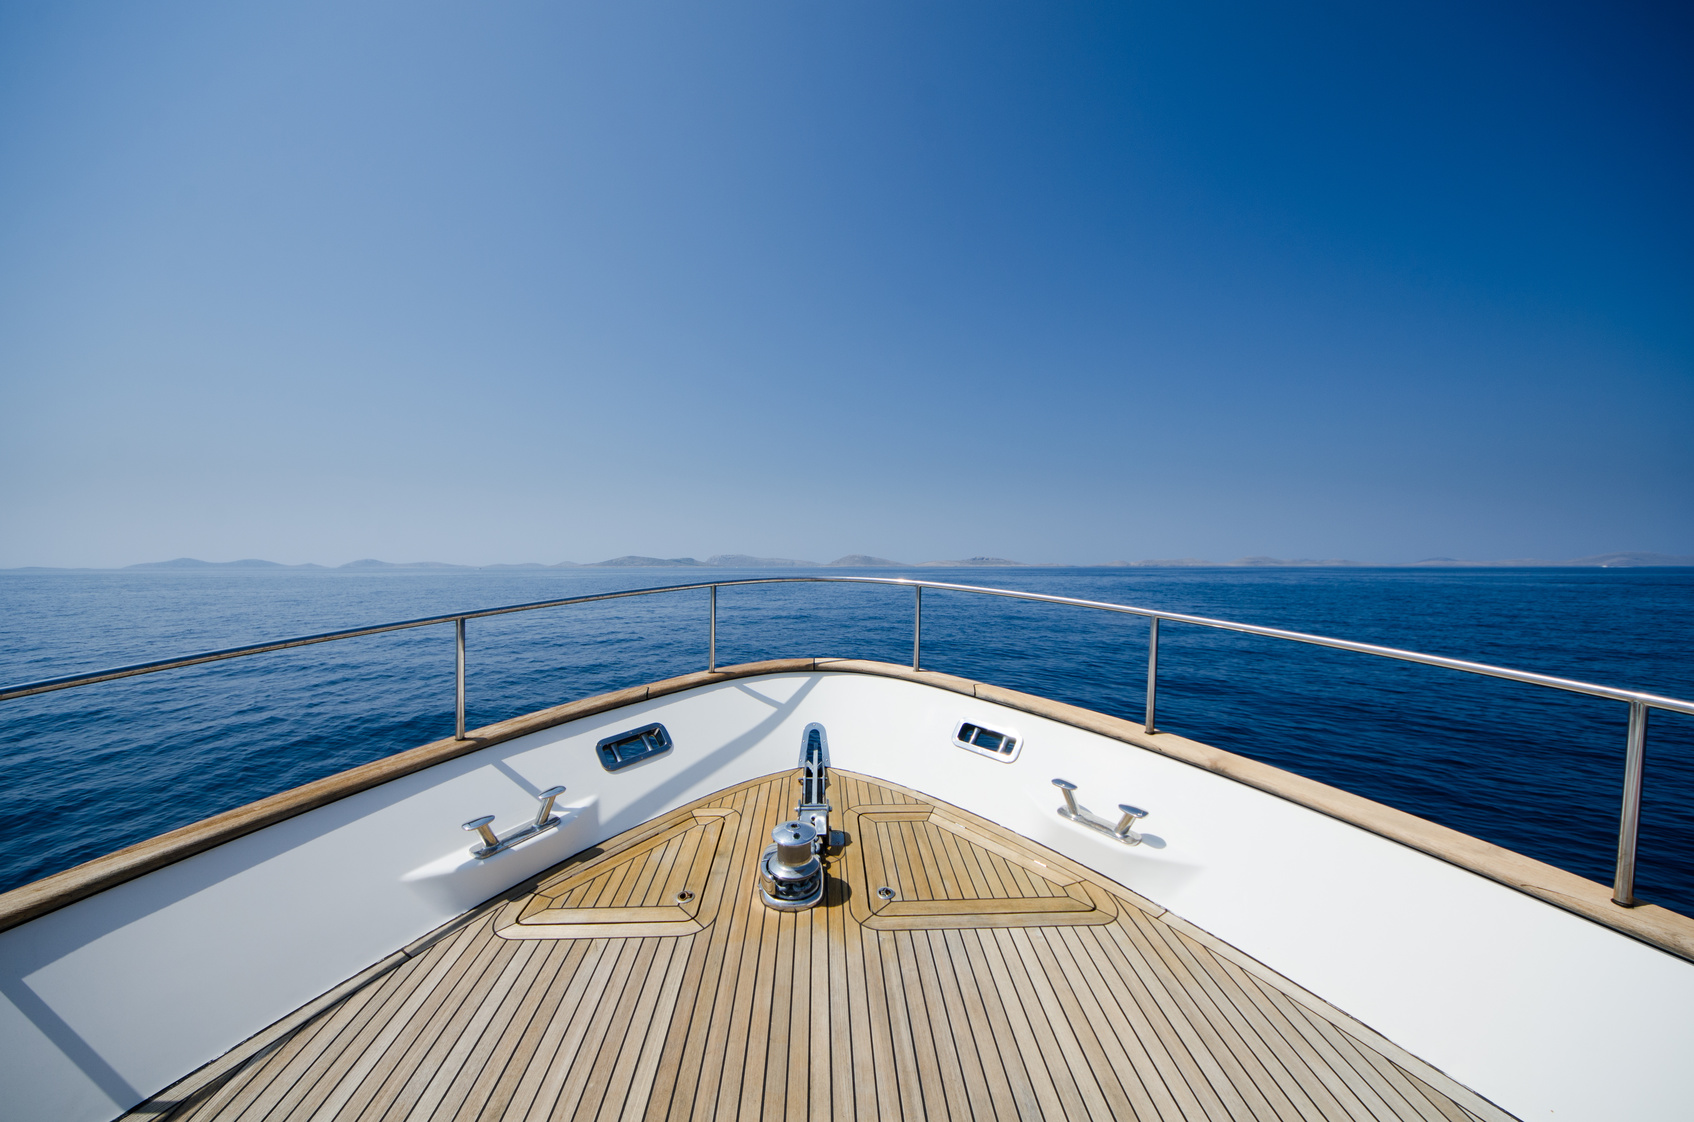 Tips You Should Keep in Mind While Buying a Boat